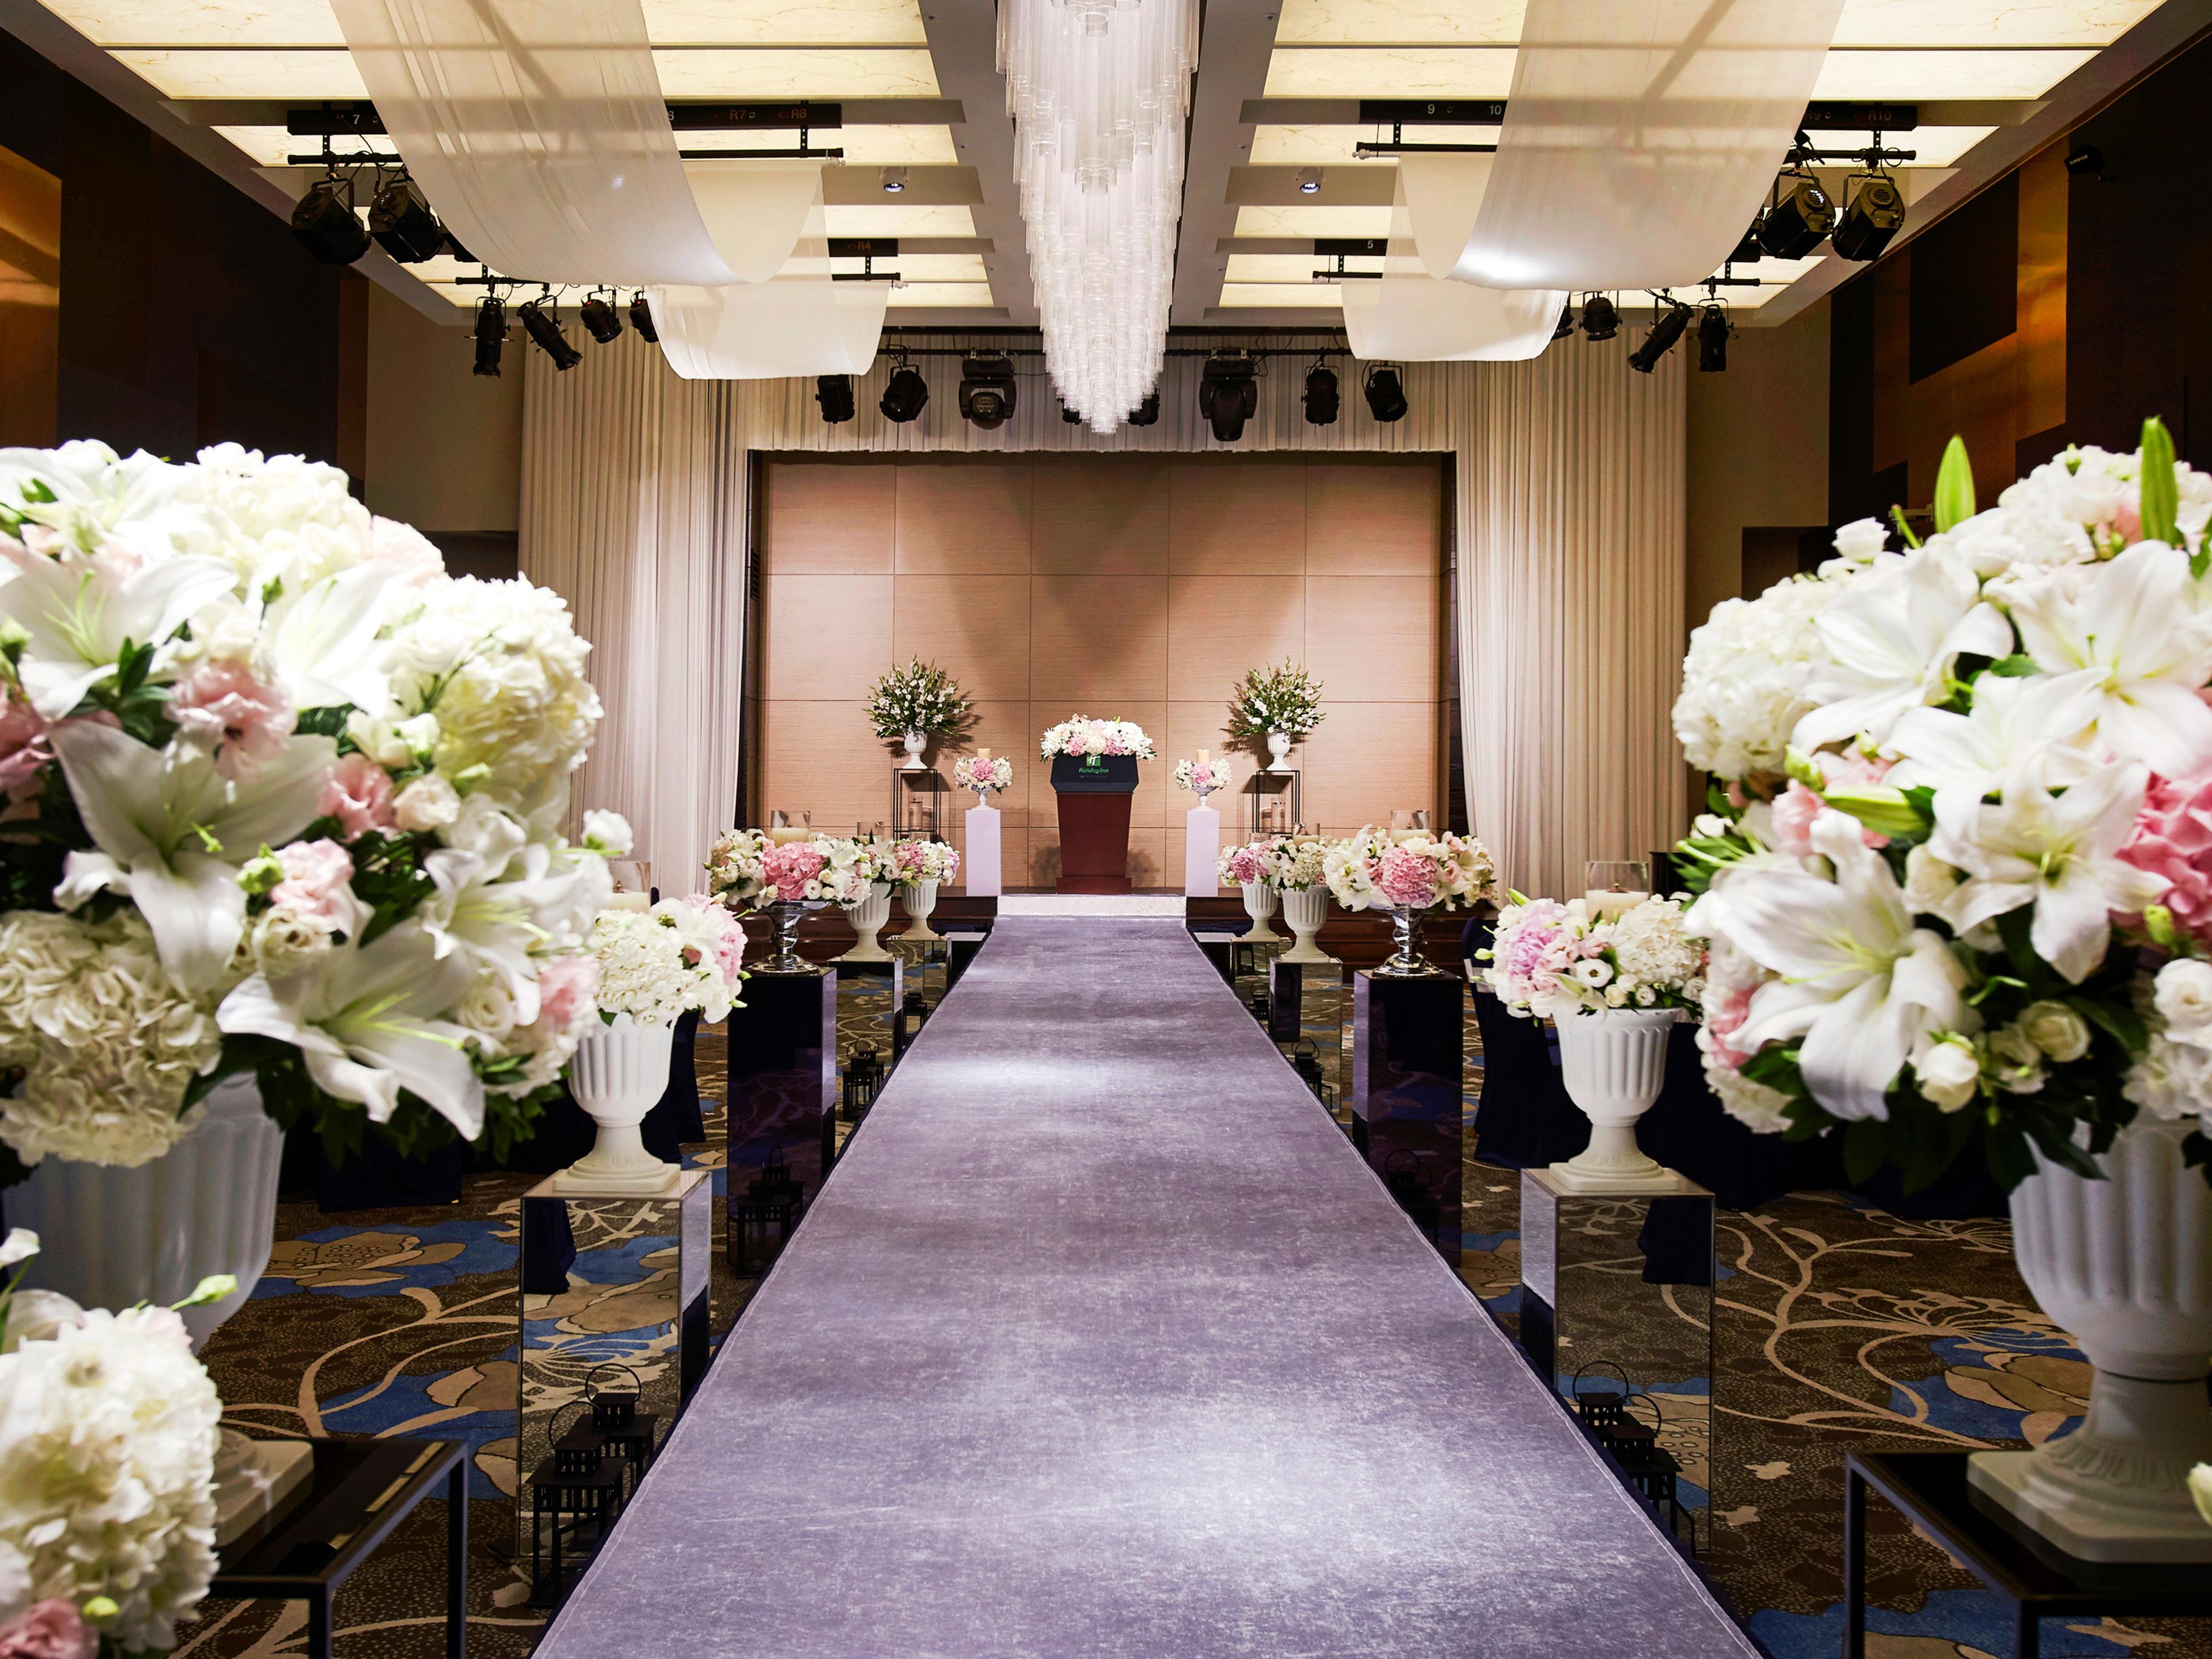 Begin your lives together with the celebration of a lifetime at Holiday Inn Incheon Songdo. Our elegant wedding spaces are the perfect backdrop for romantic celebrations of any size, from intimate ceremonies to more majestic affairs. Our on-site event professionals will ensure everything goes to plan.